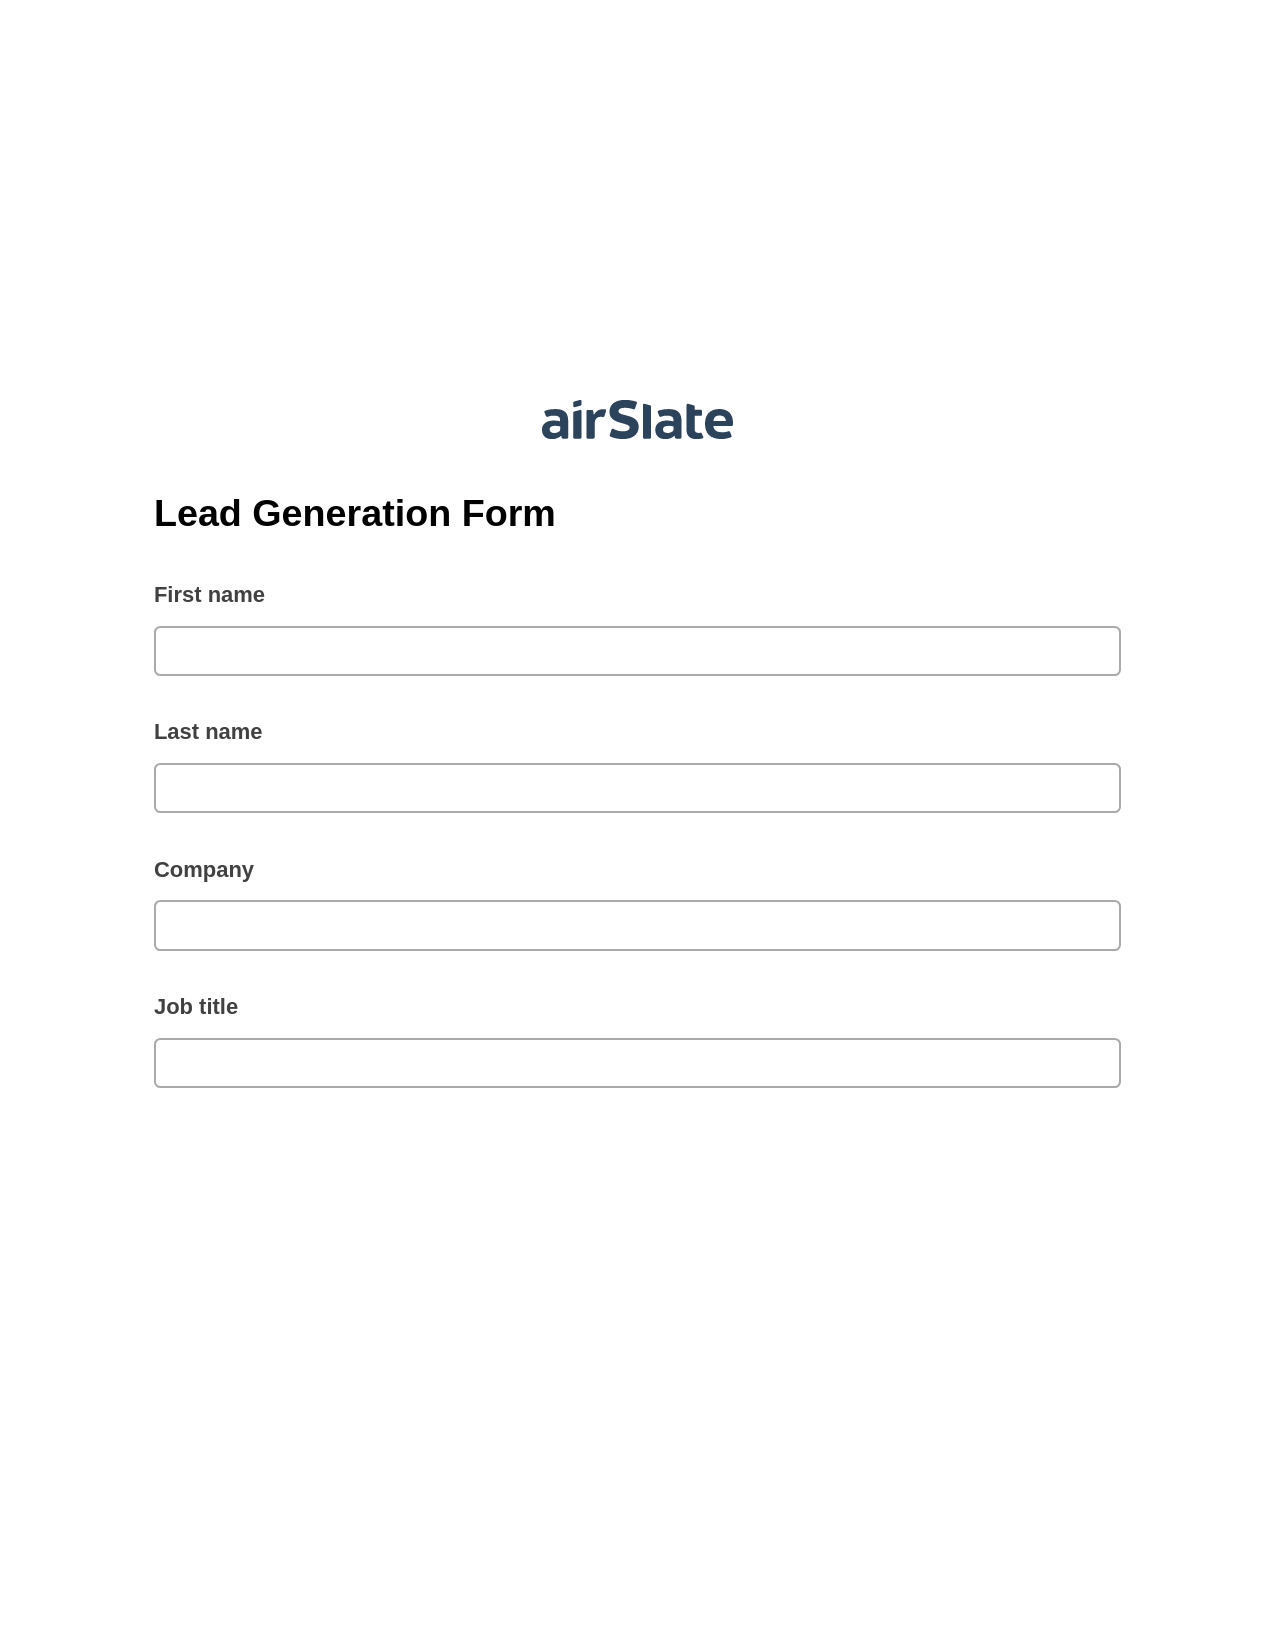 Lead Generation Form Pre-fill from Salesforce Records with SOQL Bot, System Bot - Create a Slate in another Flow, Archive to SharePoint Folder Bot